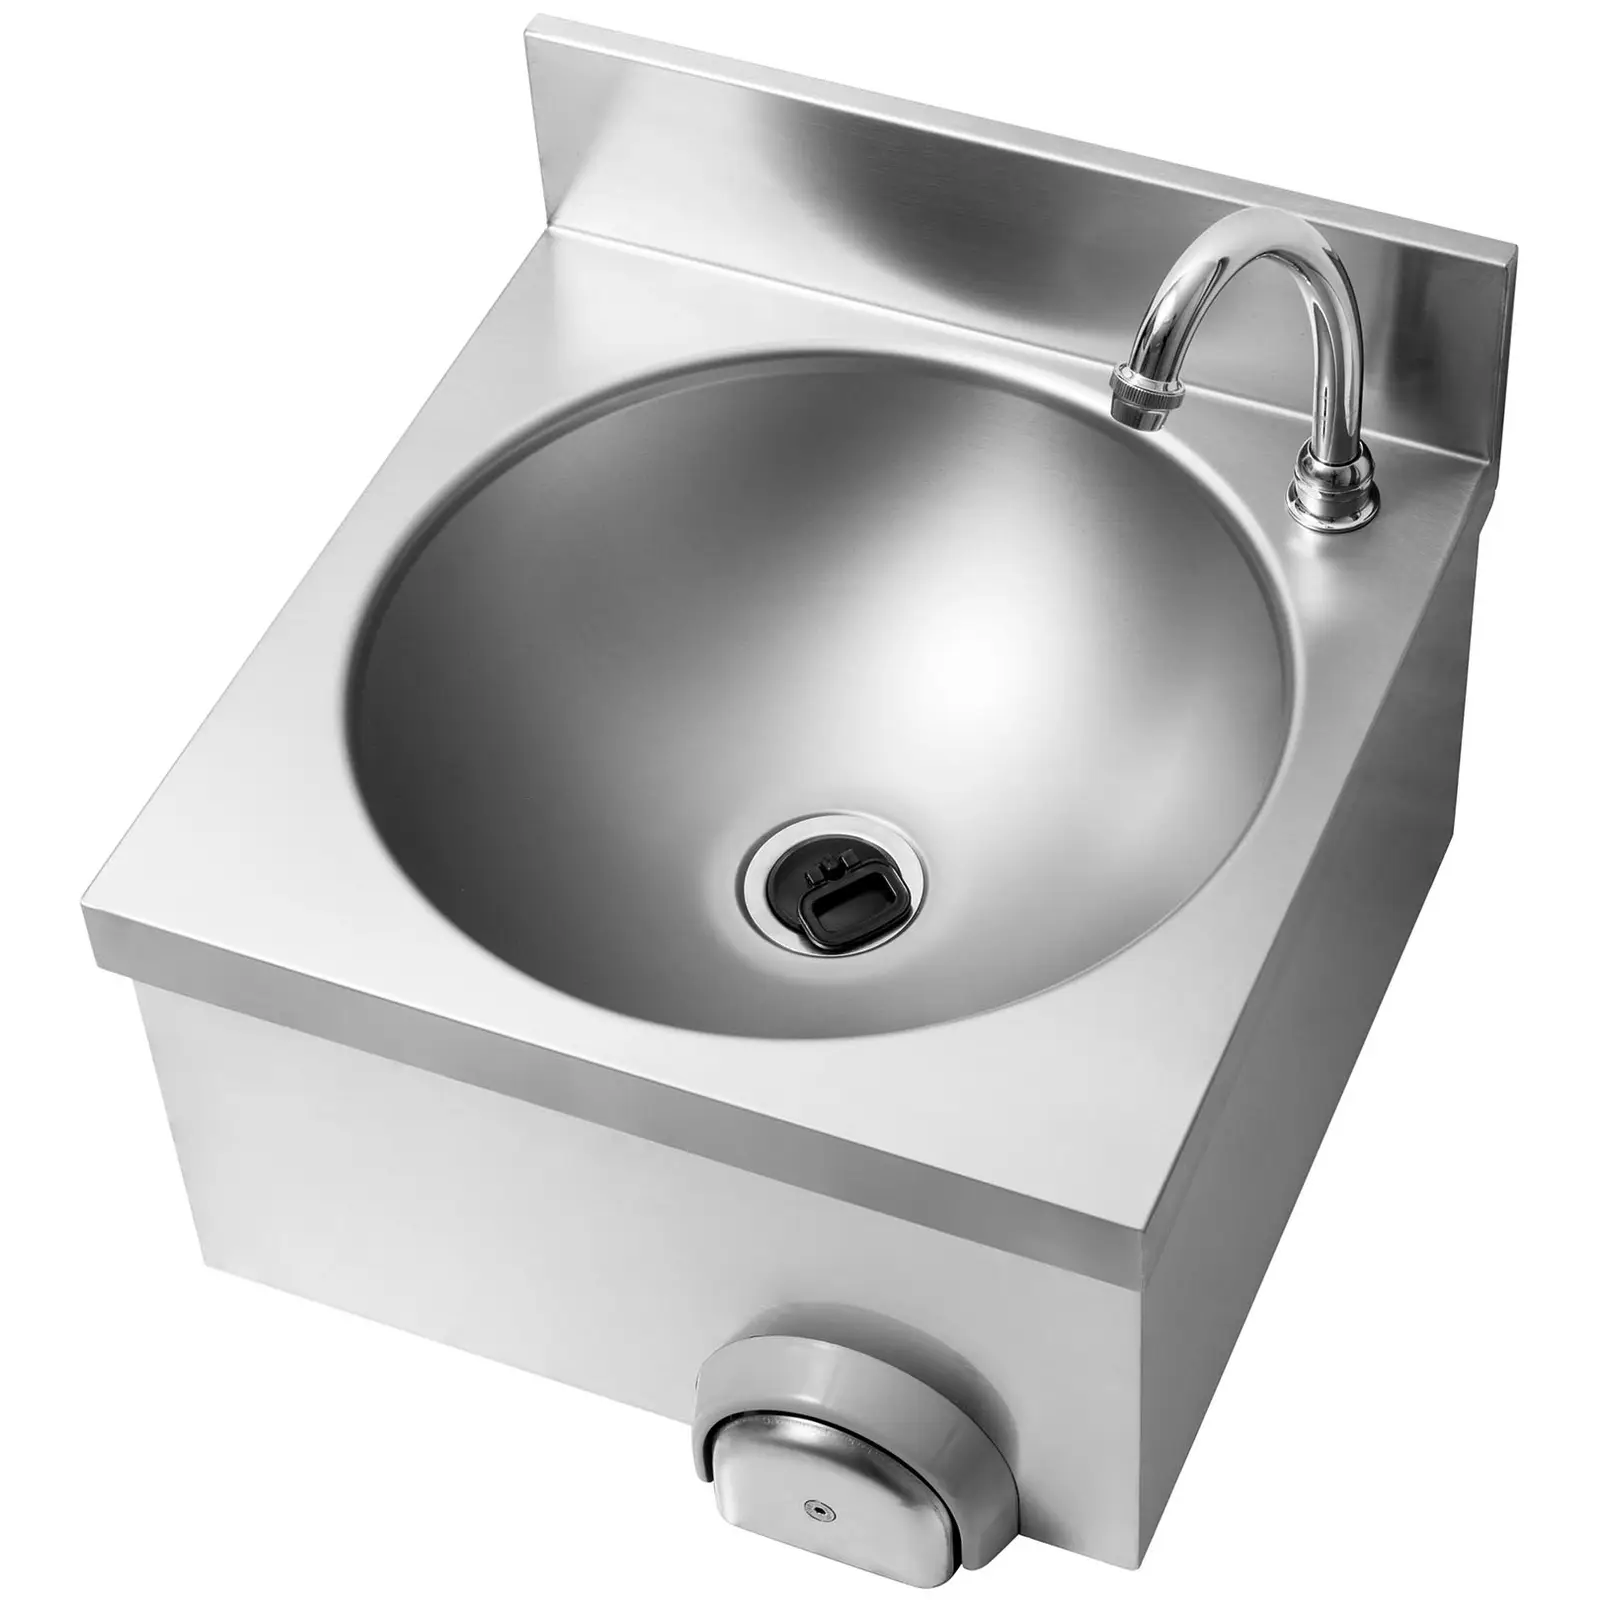 knee-operated hand wash basin - including fittings - Stainless steel, chrome-plated brass - tap length 140 mm